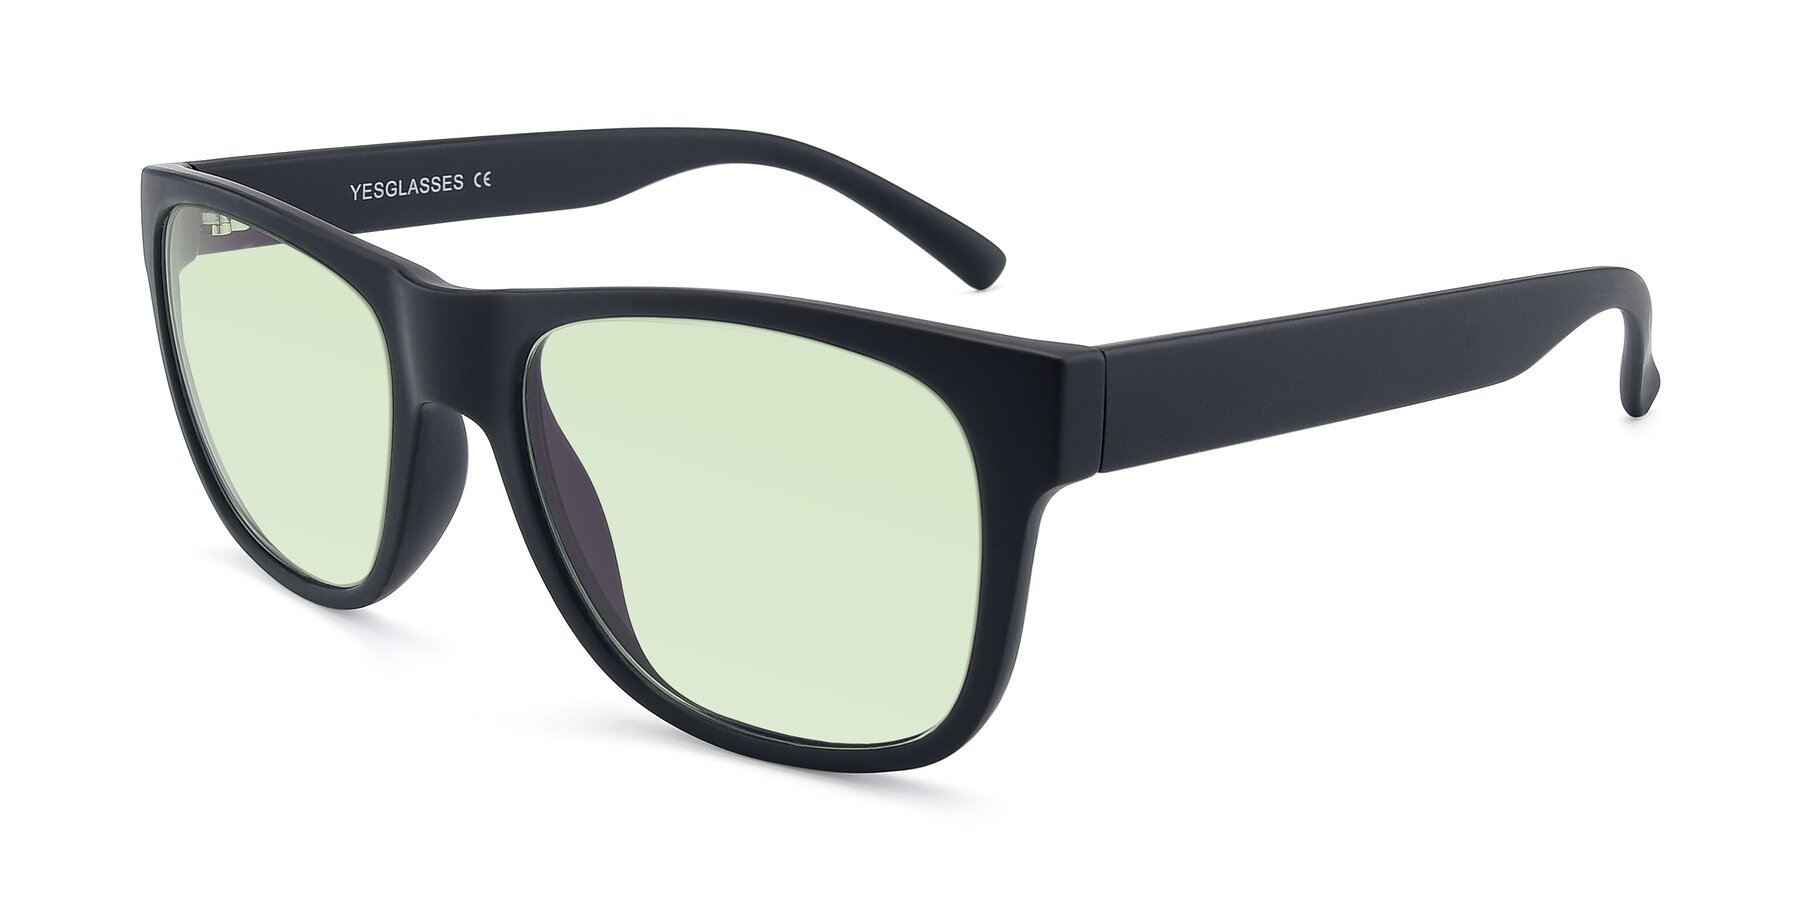 Angle of SSR213 in Matte Black with Light Green Tinted Lenses